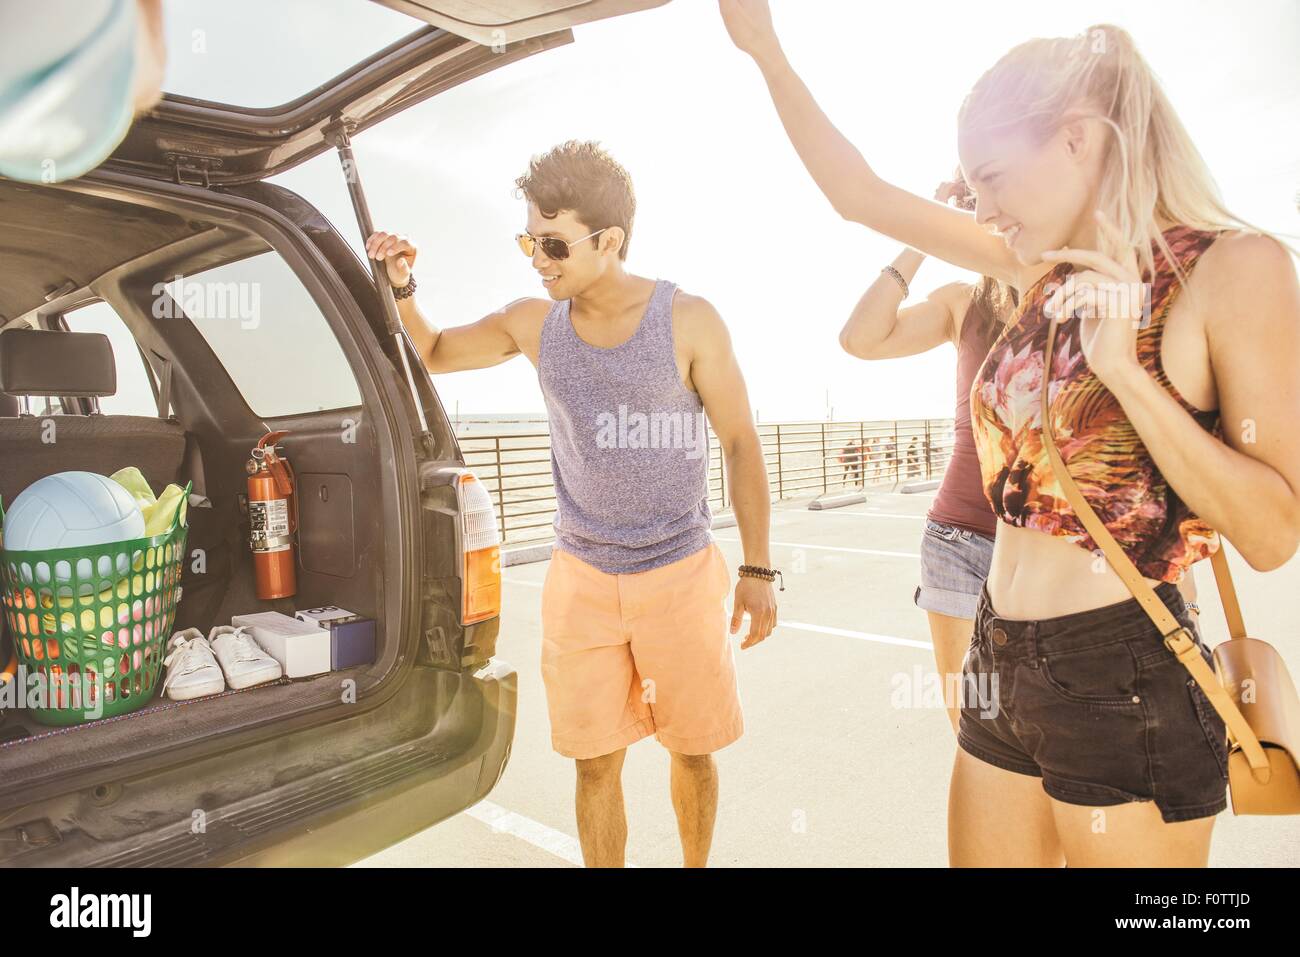 Group of friends standing by car, at beach Stock Photo